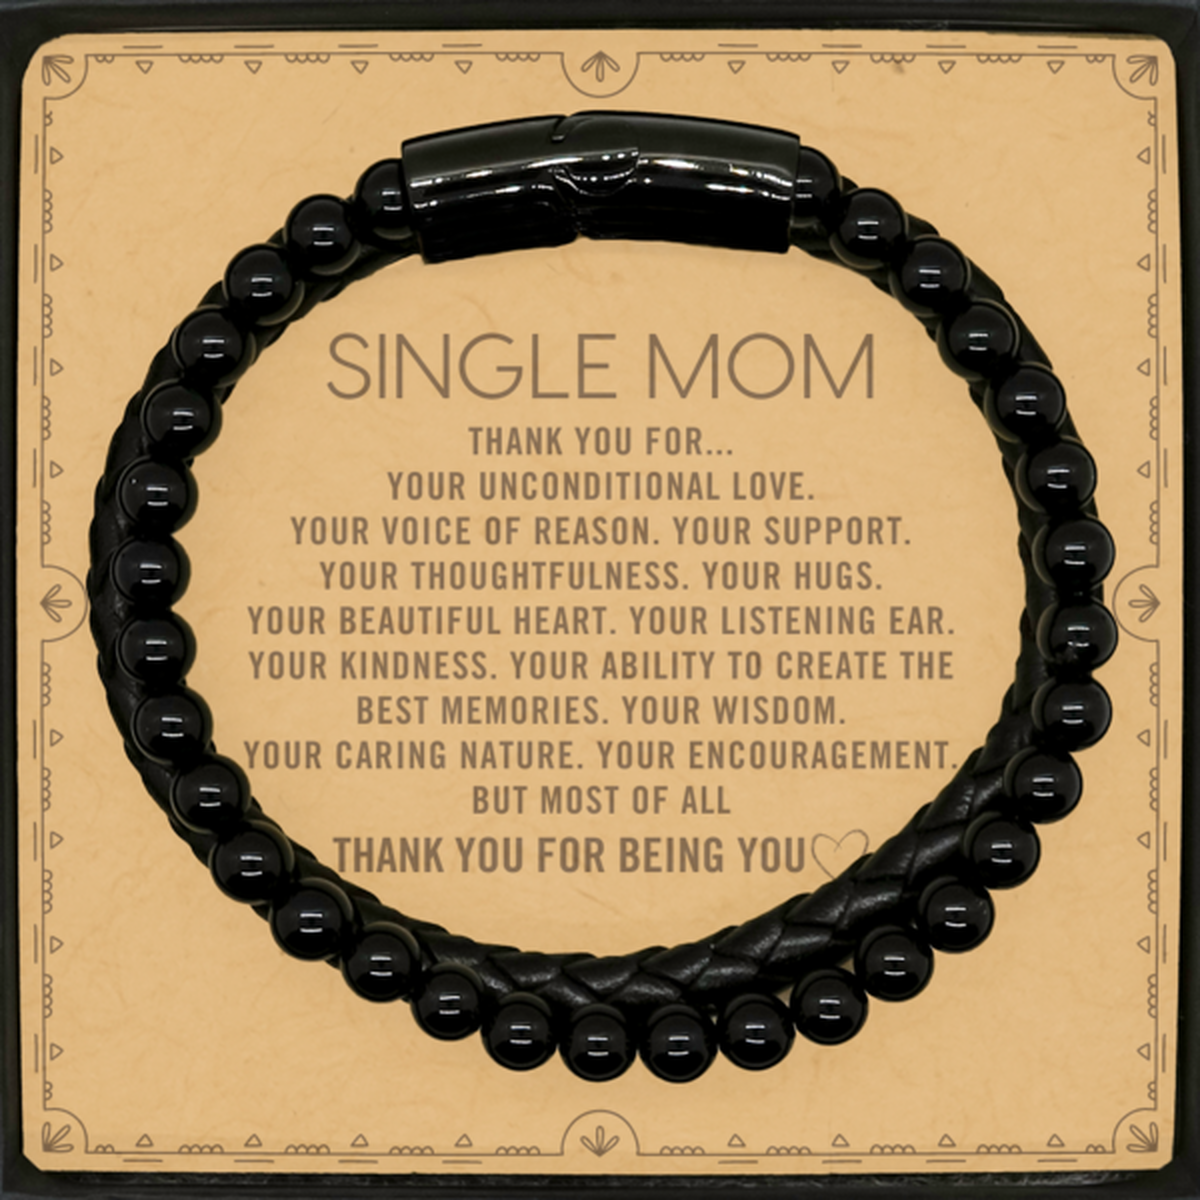 Single Mom Stone Leather Bracelets Custom, Message Card Gifts For Single Mom Christmas Graduation Birthday Gifts for Men Women Single Mom Thank you for Your unconditional love